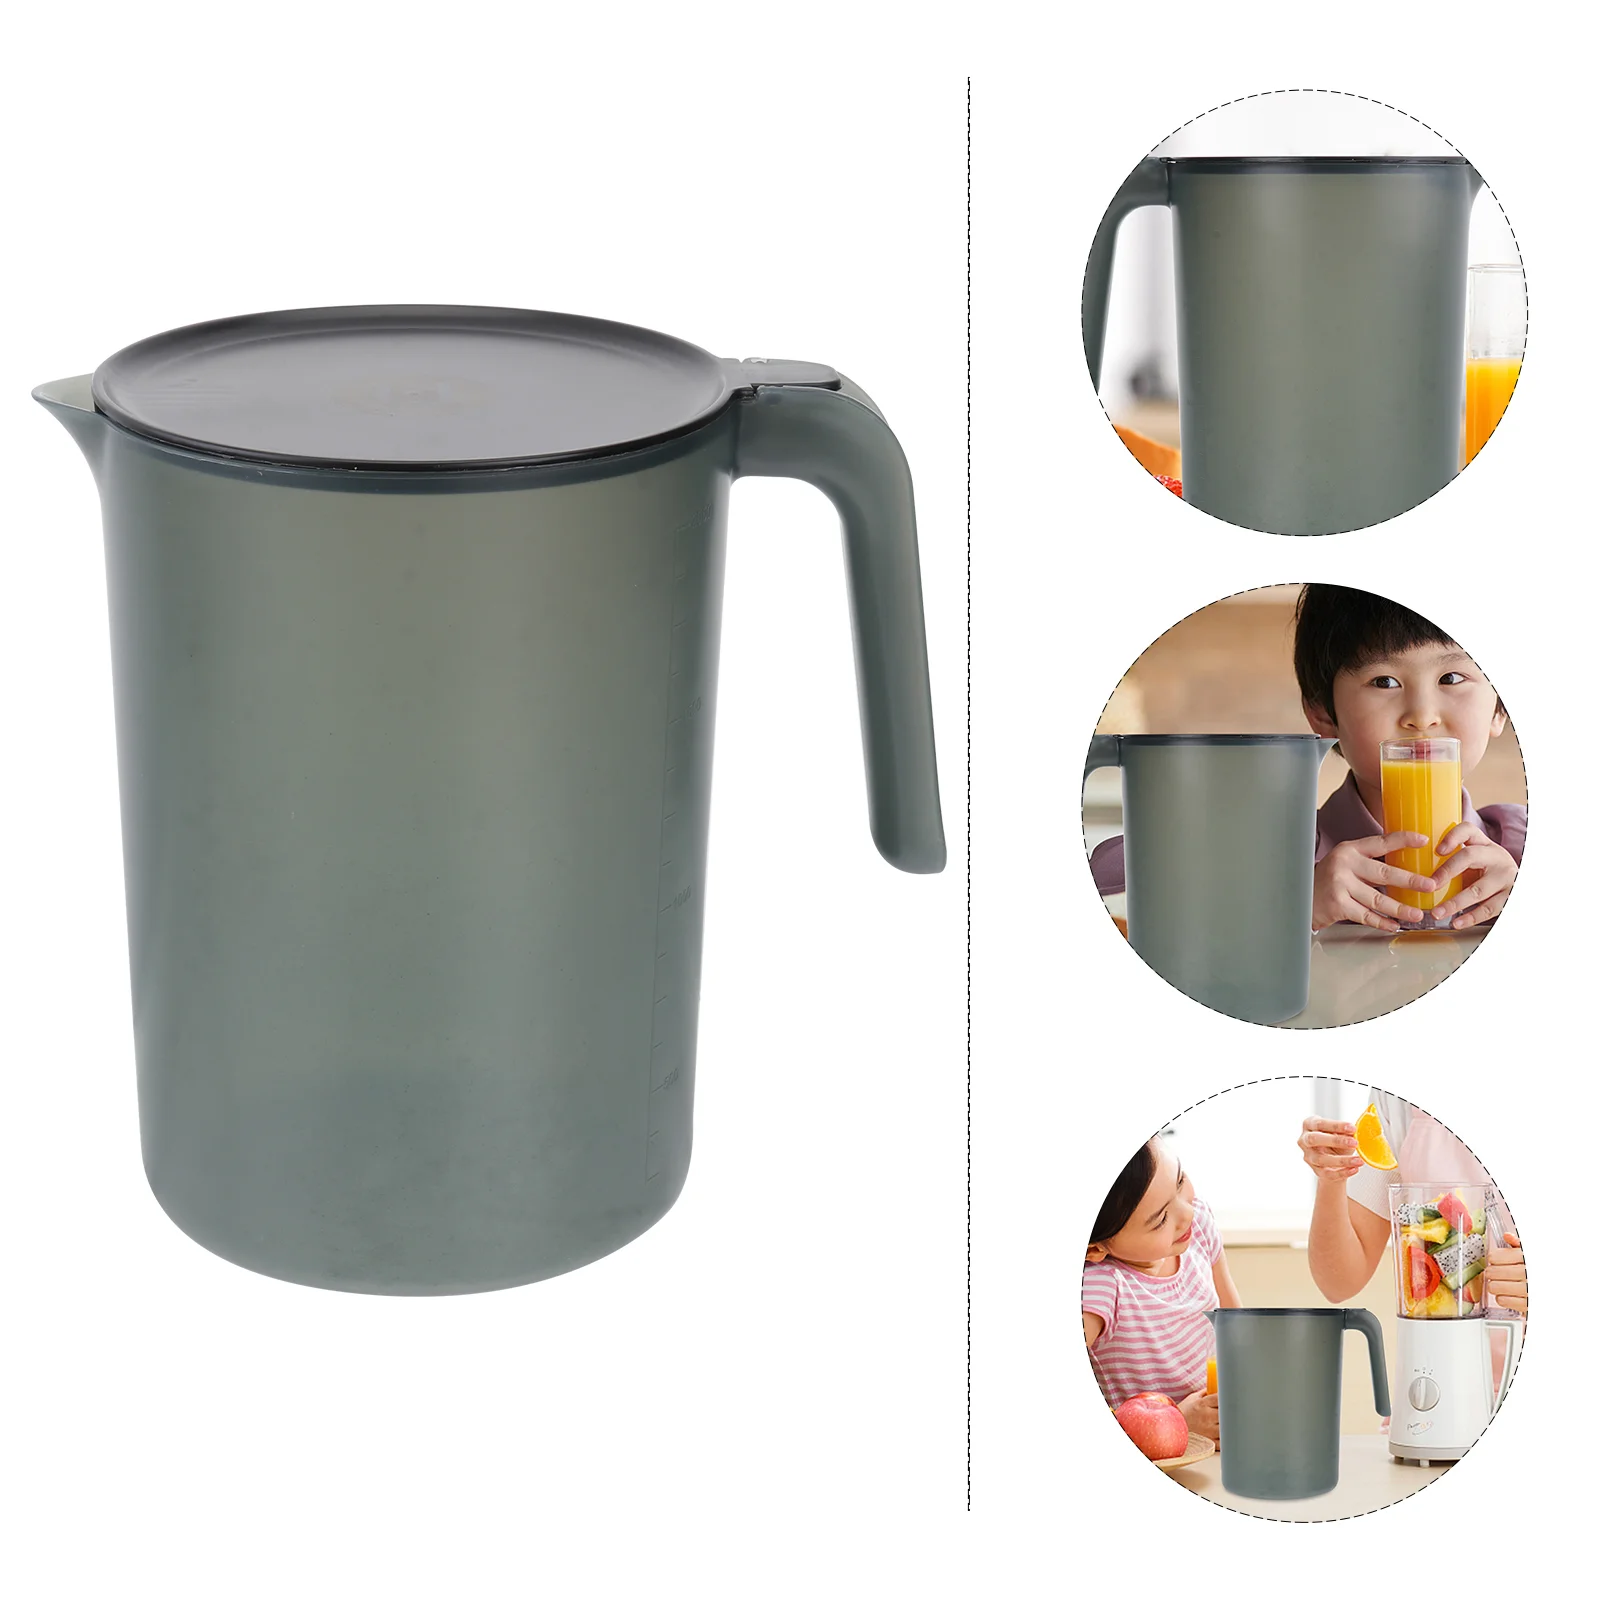 

Pitcher Waterwithkettle Beverage Jug Tea Lid Cold Fridge Pitchers Lemonade Pot Hot Iced Lids Beercarafes Containers Kettlesscale